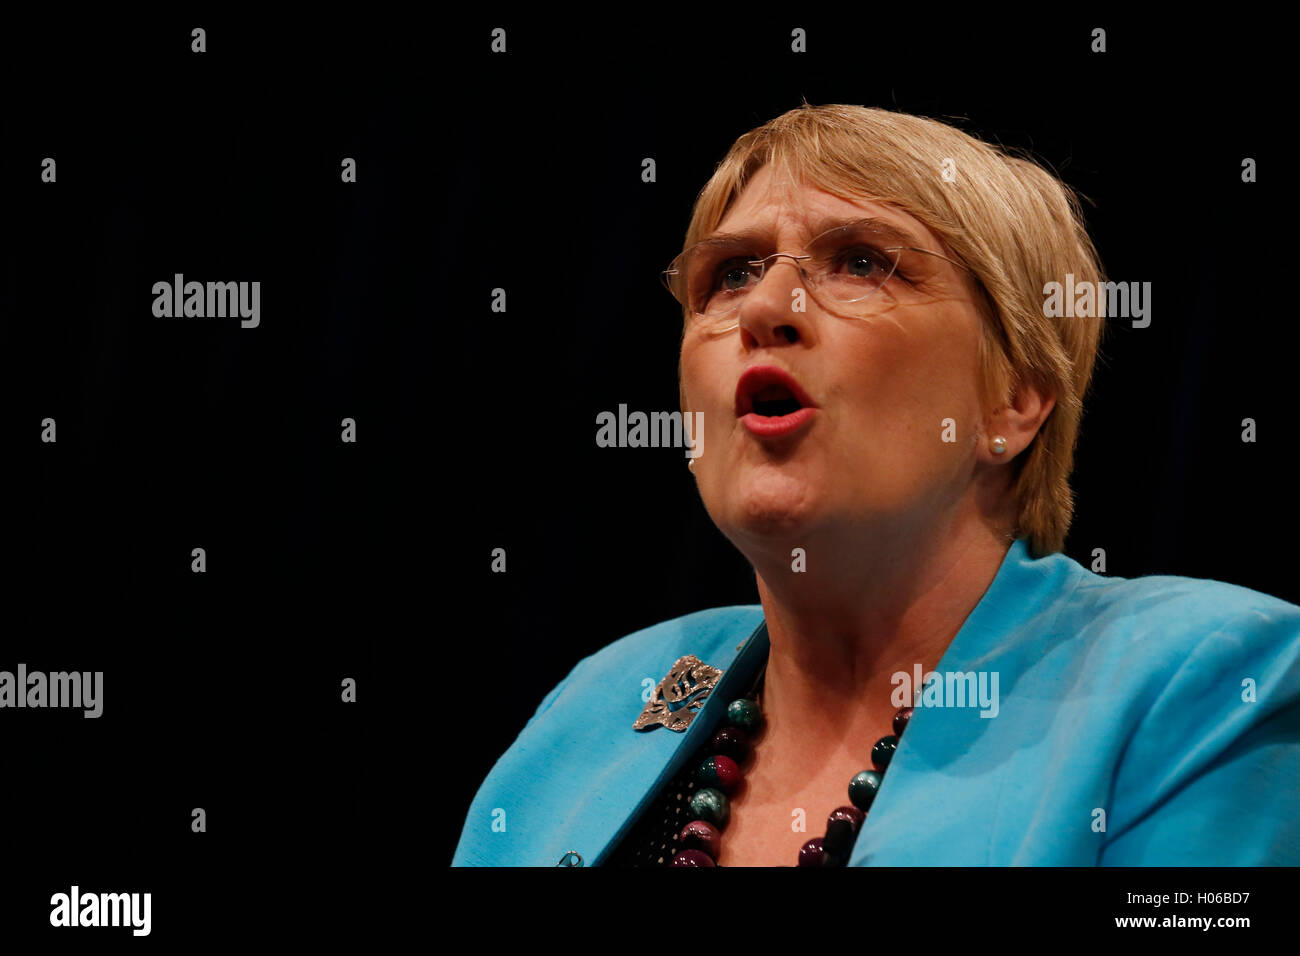 Brighton, UK. 20th Sep, 2016. Party president, Sarah Brinton, Baroness Brinton, known as Sal Brinton speaks during the Liberal Democrats Autumn Conference at Brighton, UK, Tuesday September 20, 2016.       Credit:  Luke MacGregor/Alamy Live News Stock Photo